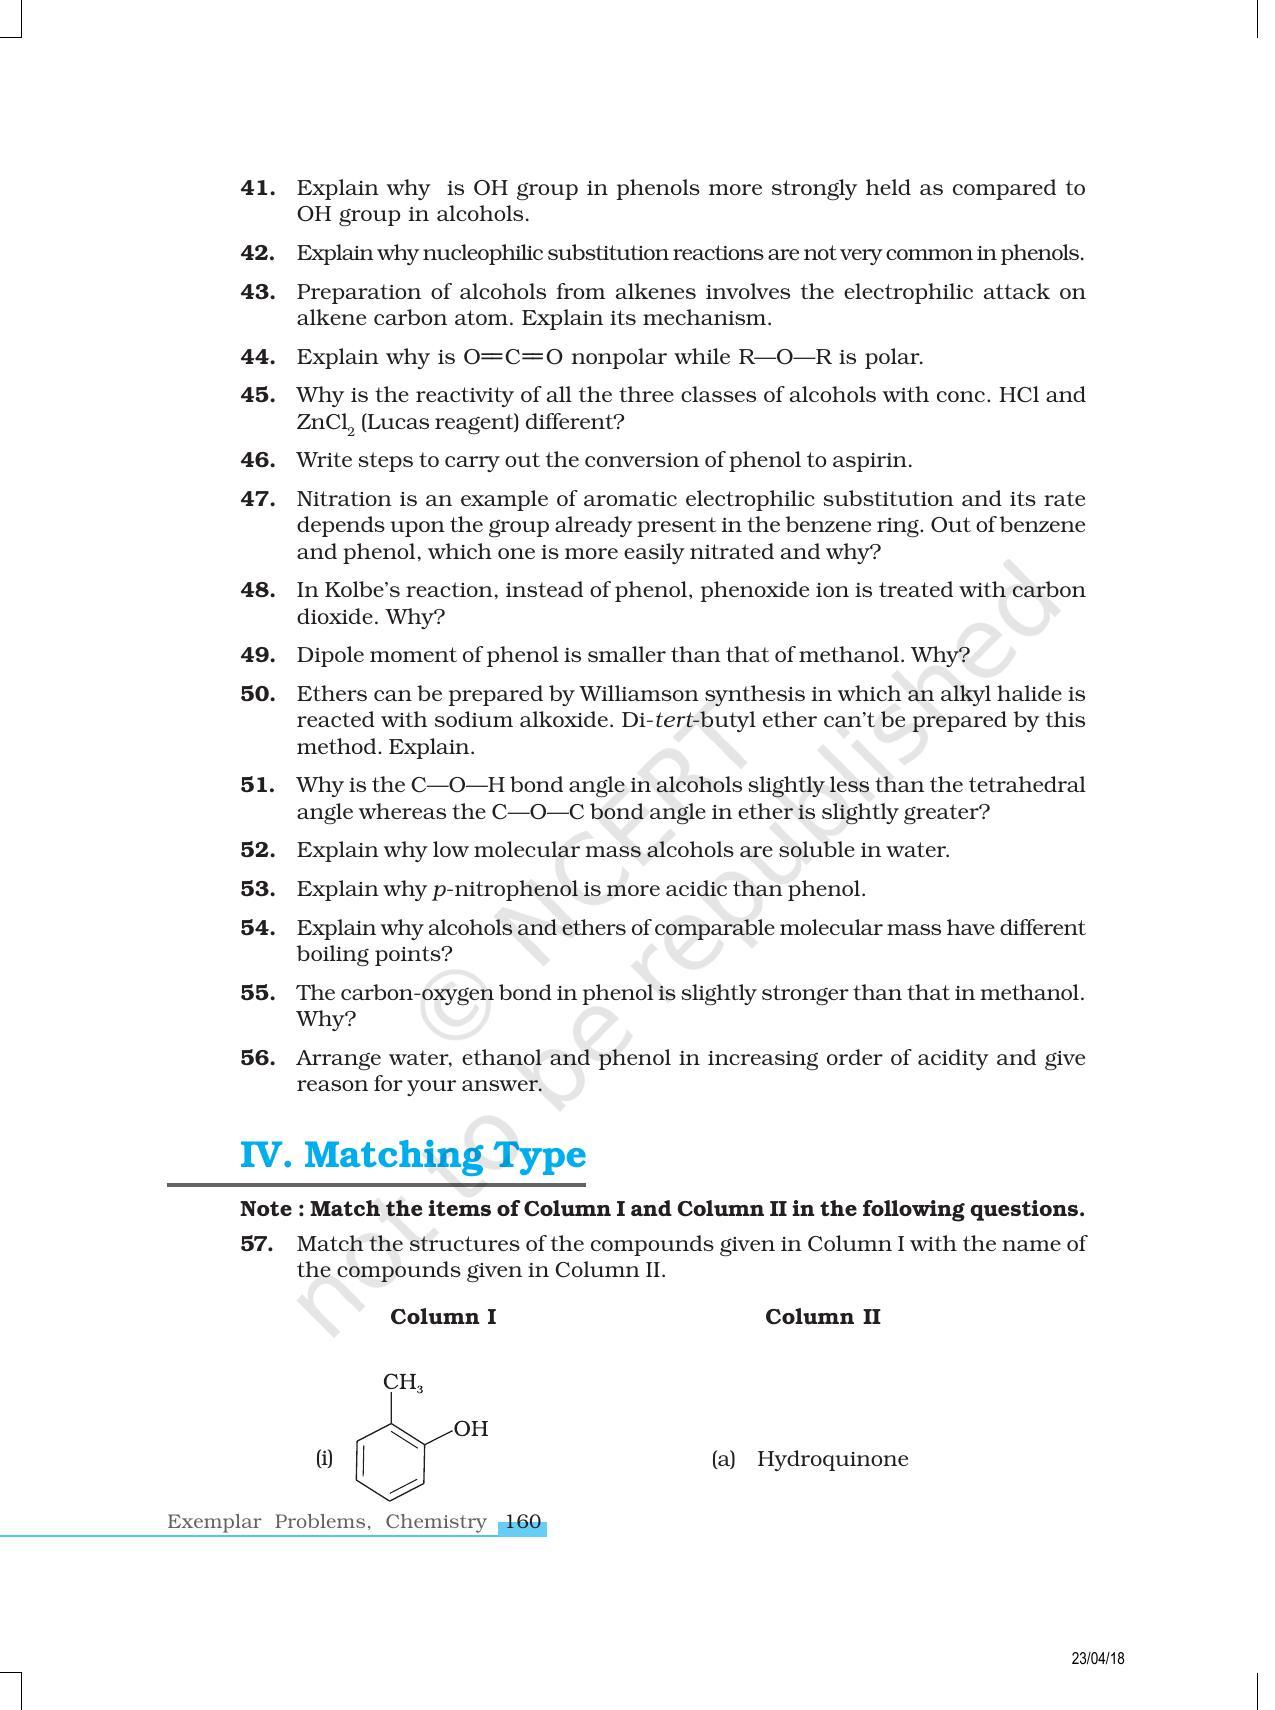 NCERT Exemplar Book for Class 12 Chemistry: Chapter 11 Alcohols, Phenols and Ethers - Page 7